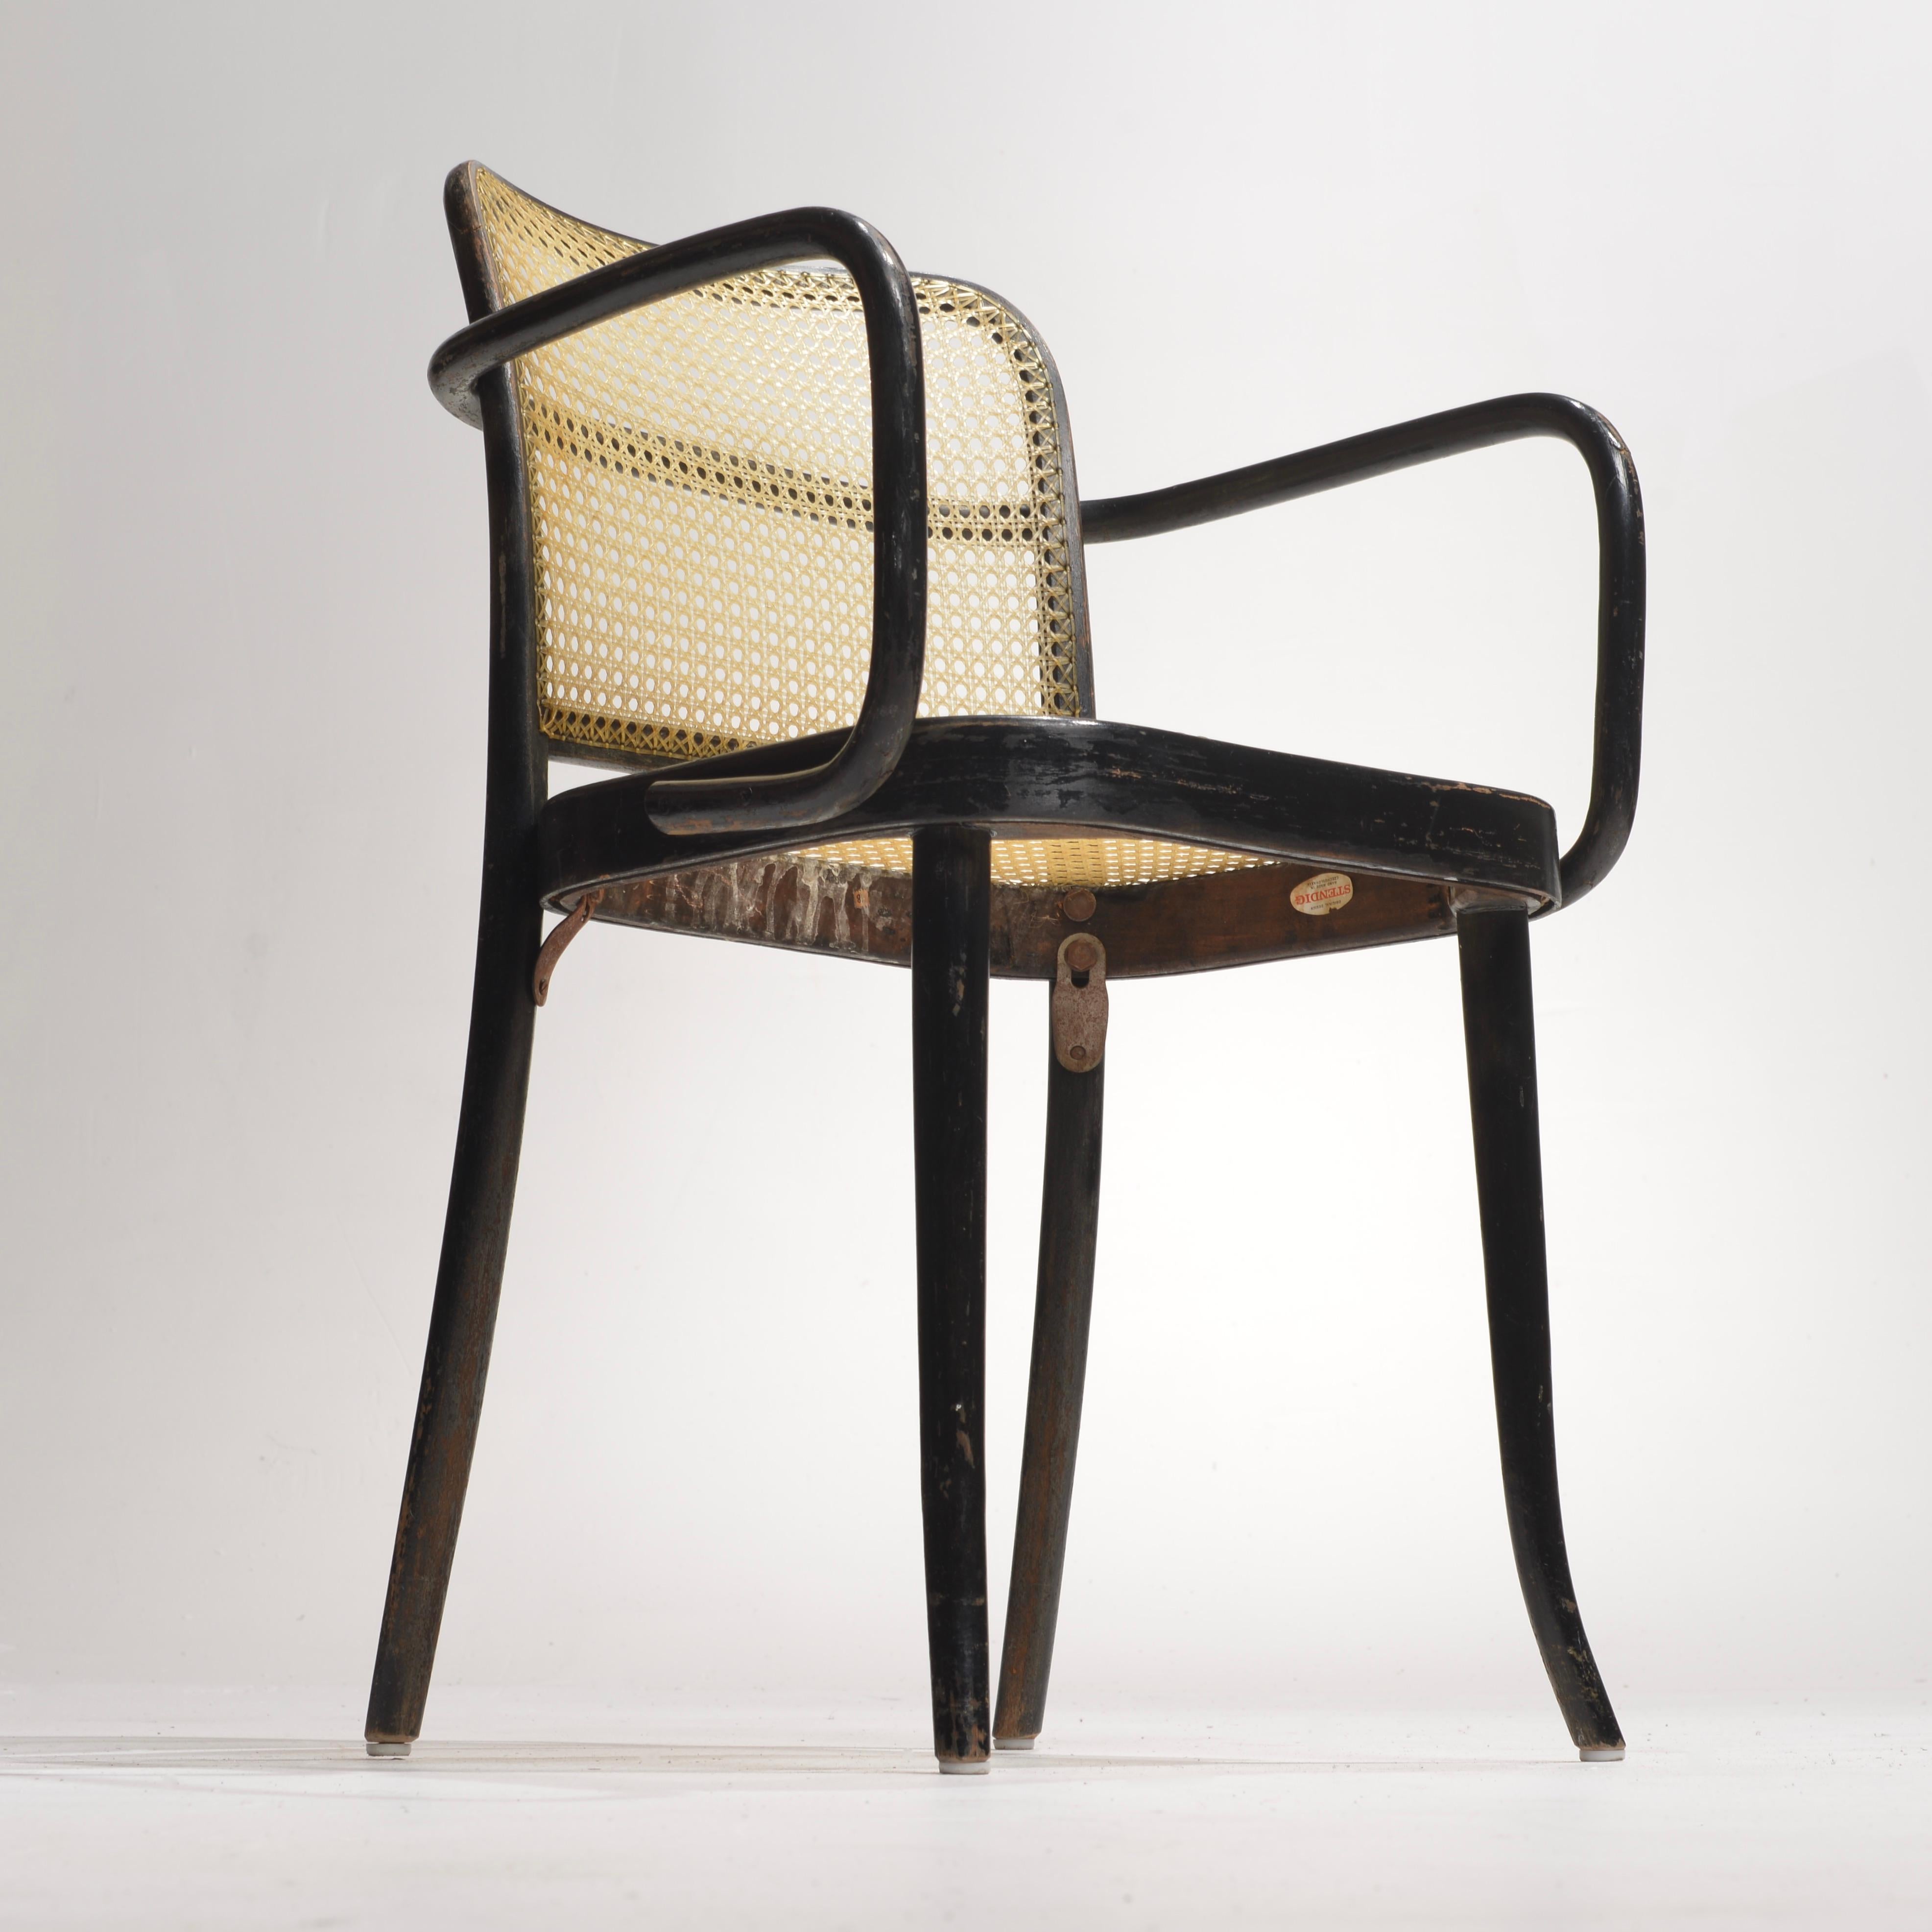 Woven Josef Hoffmann Bentwood Beech Prague Model 811 Chairs in Black and Leather Weave For Sale